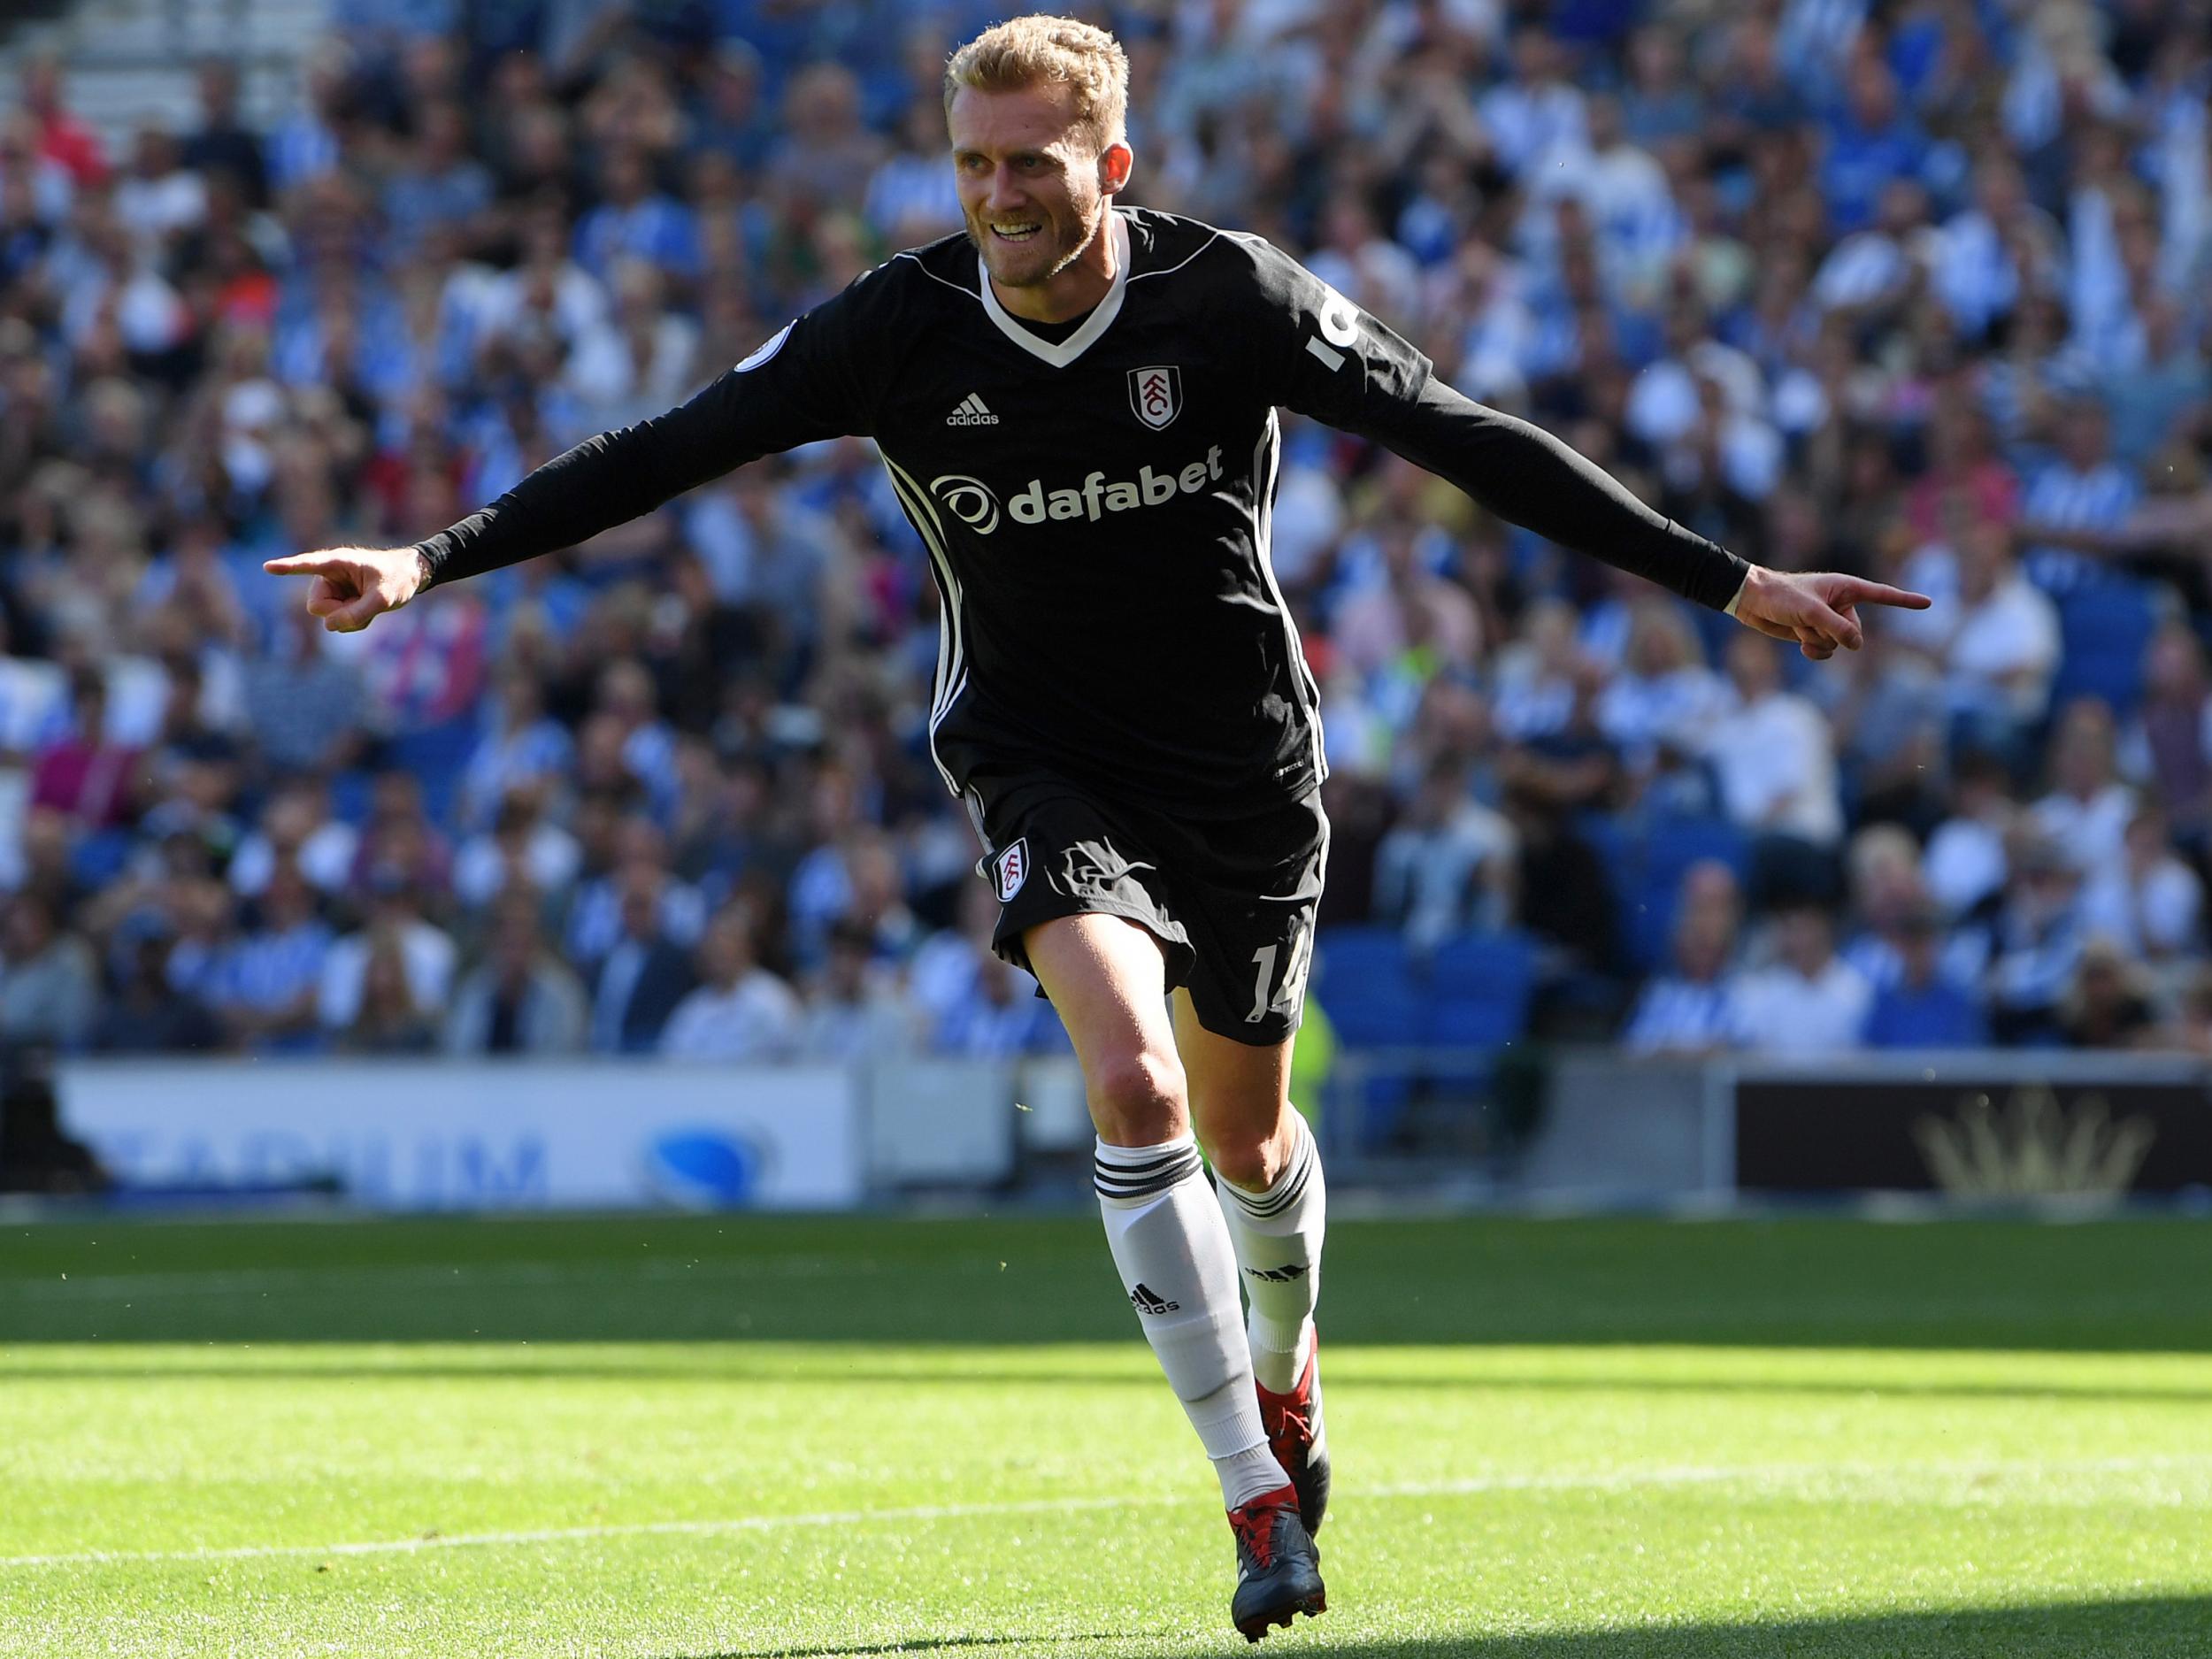 Andre Schurrle opened the scoring for Fulham